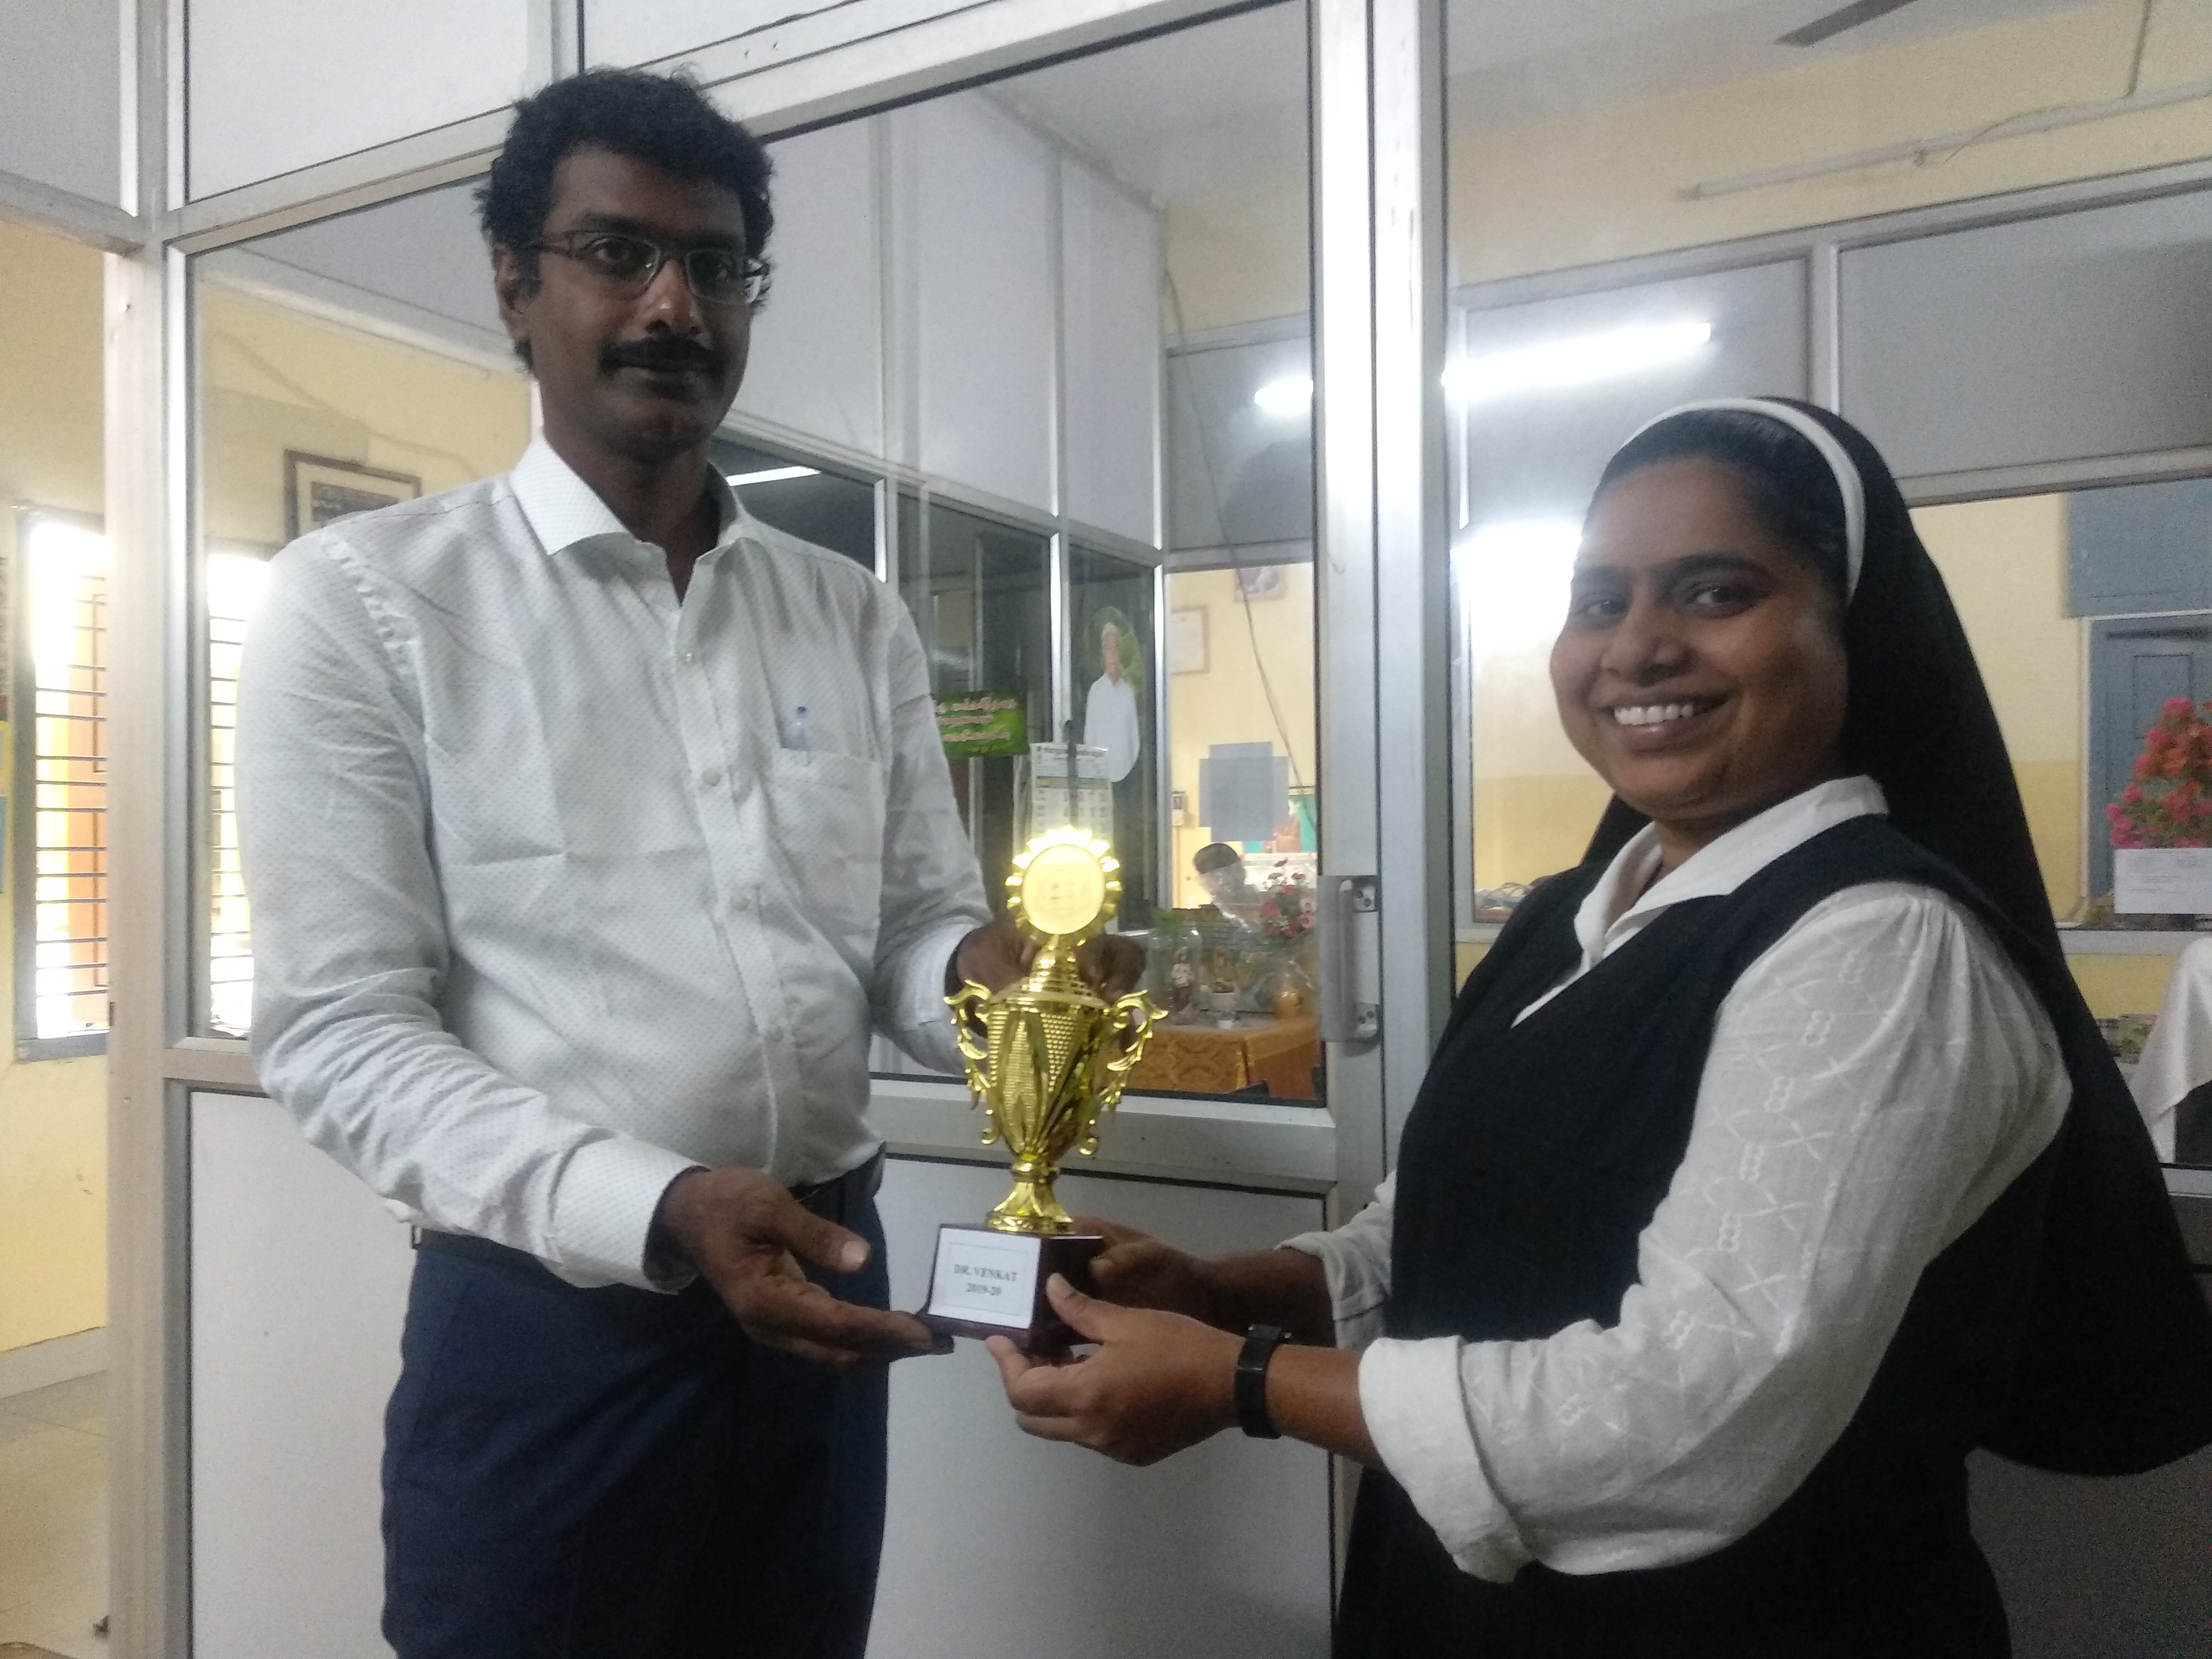 Our Founder Mr. Venkatesh V being felicitated by Sr. Marry - Principal on 27.11.2019 at St.Joseph Matric Hr.Secondary School Porur Chennai